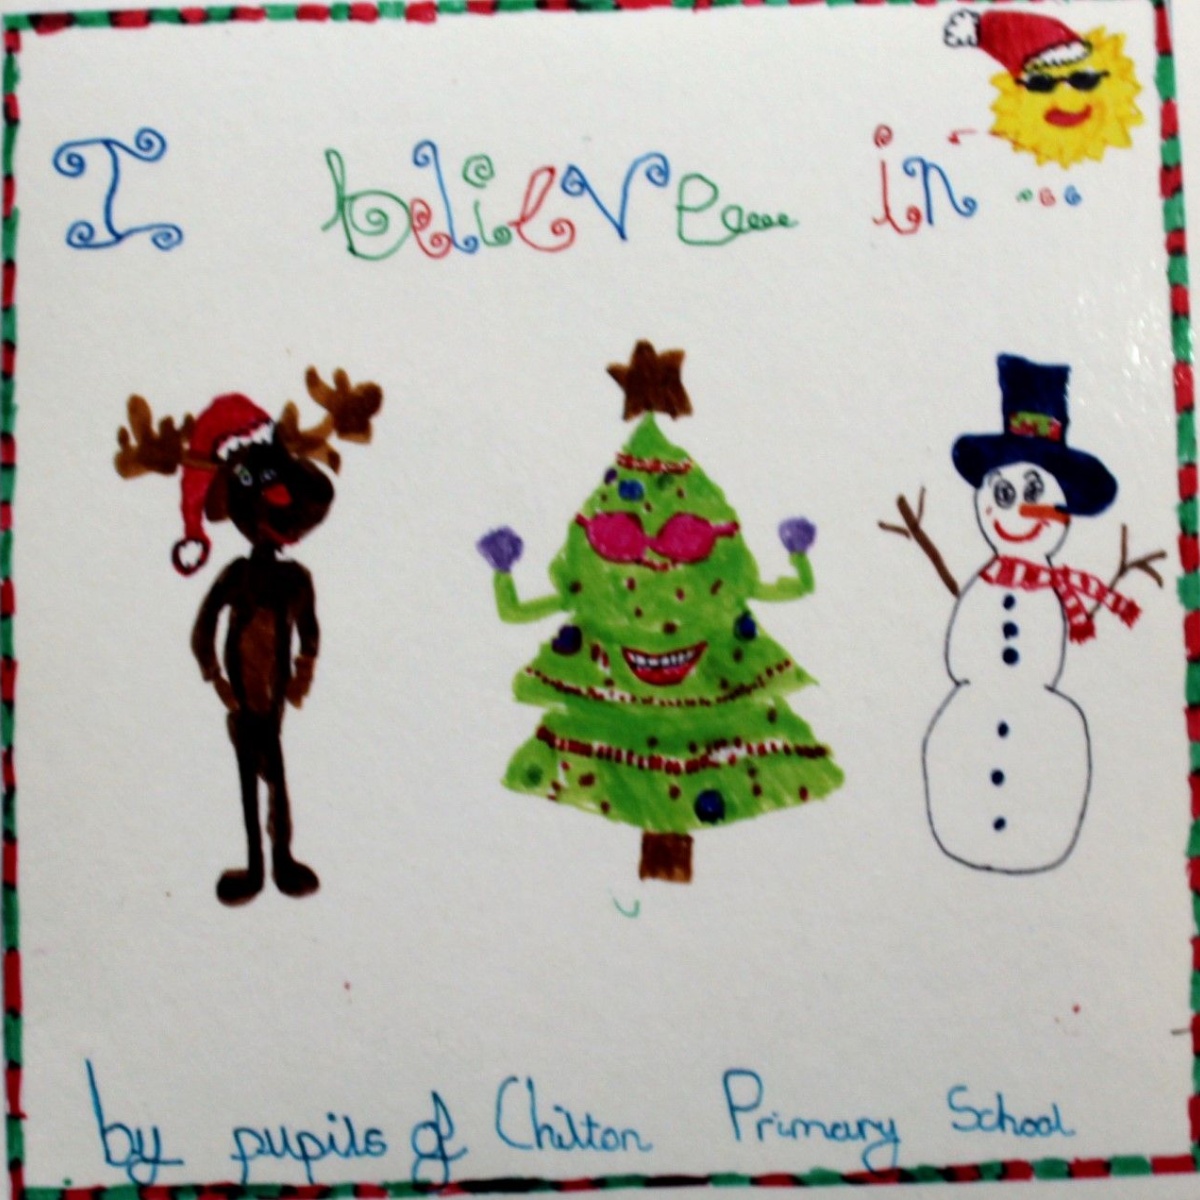 Chilton Primary School - Our Christmas CD!